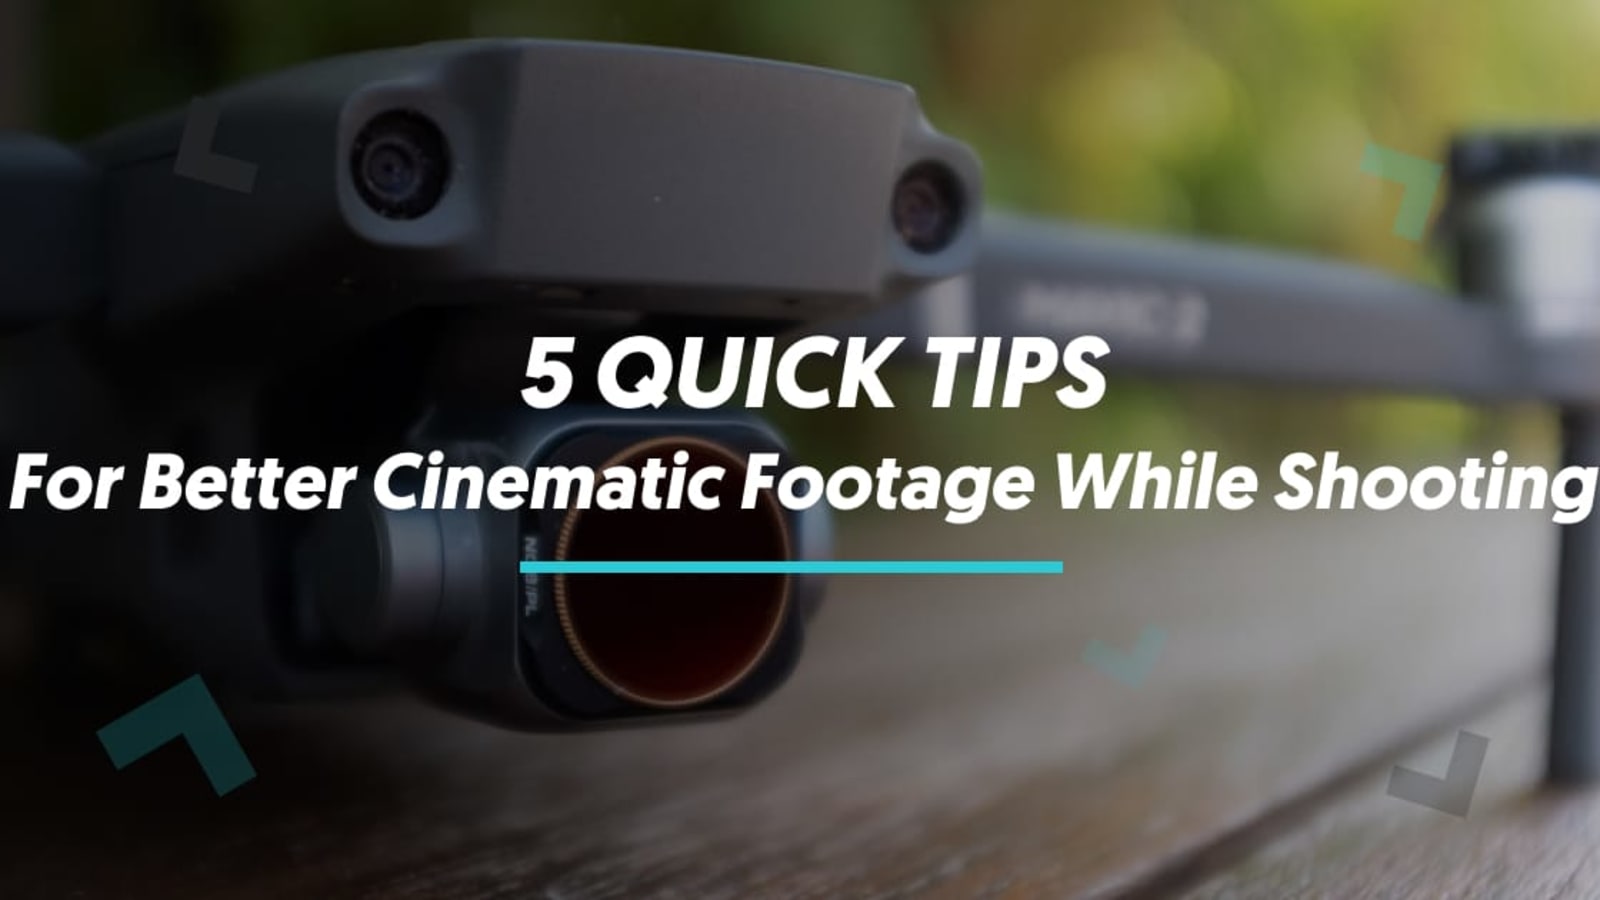 5 Quick Tips For Better Cinematic Footage While Shooting